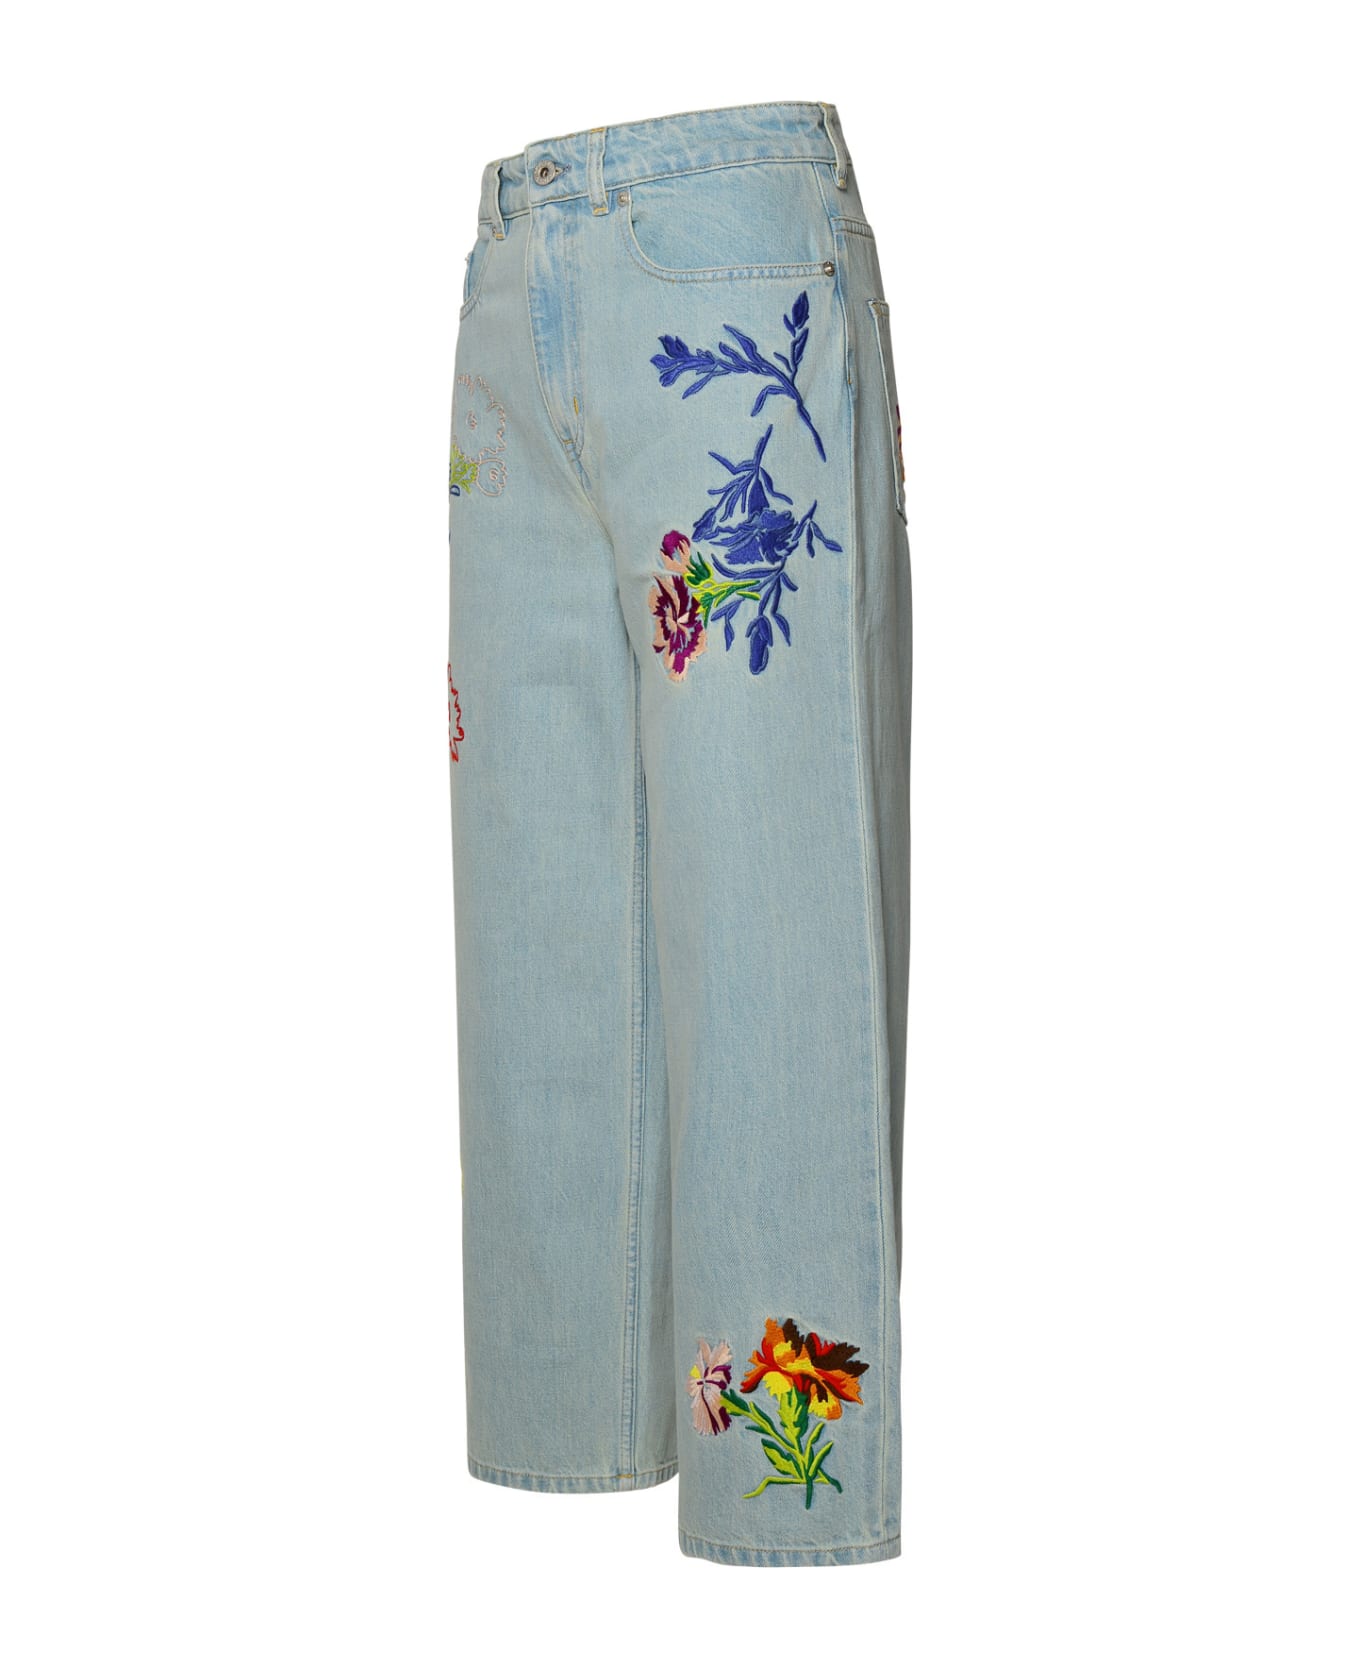 Kenzo Flower Jeans - STONE BLEACHED